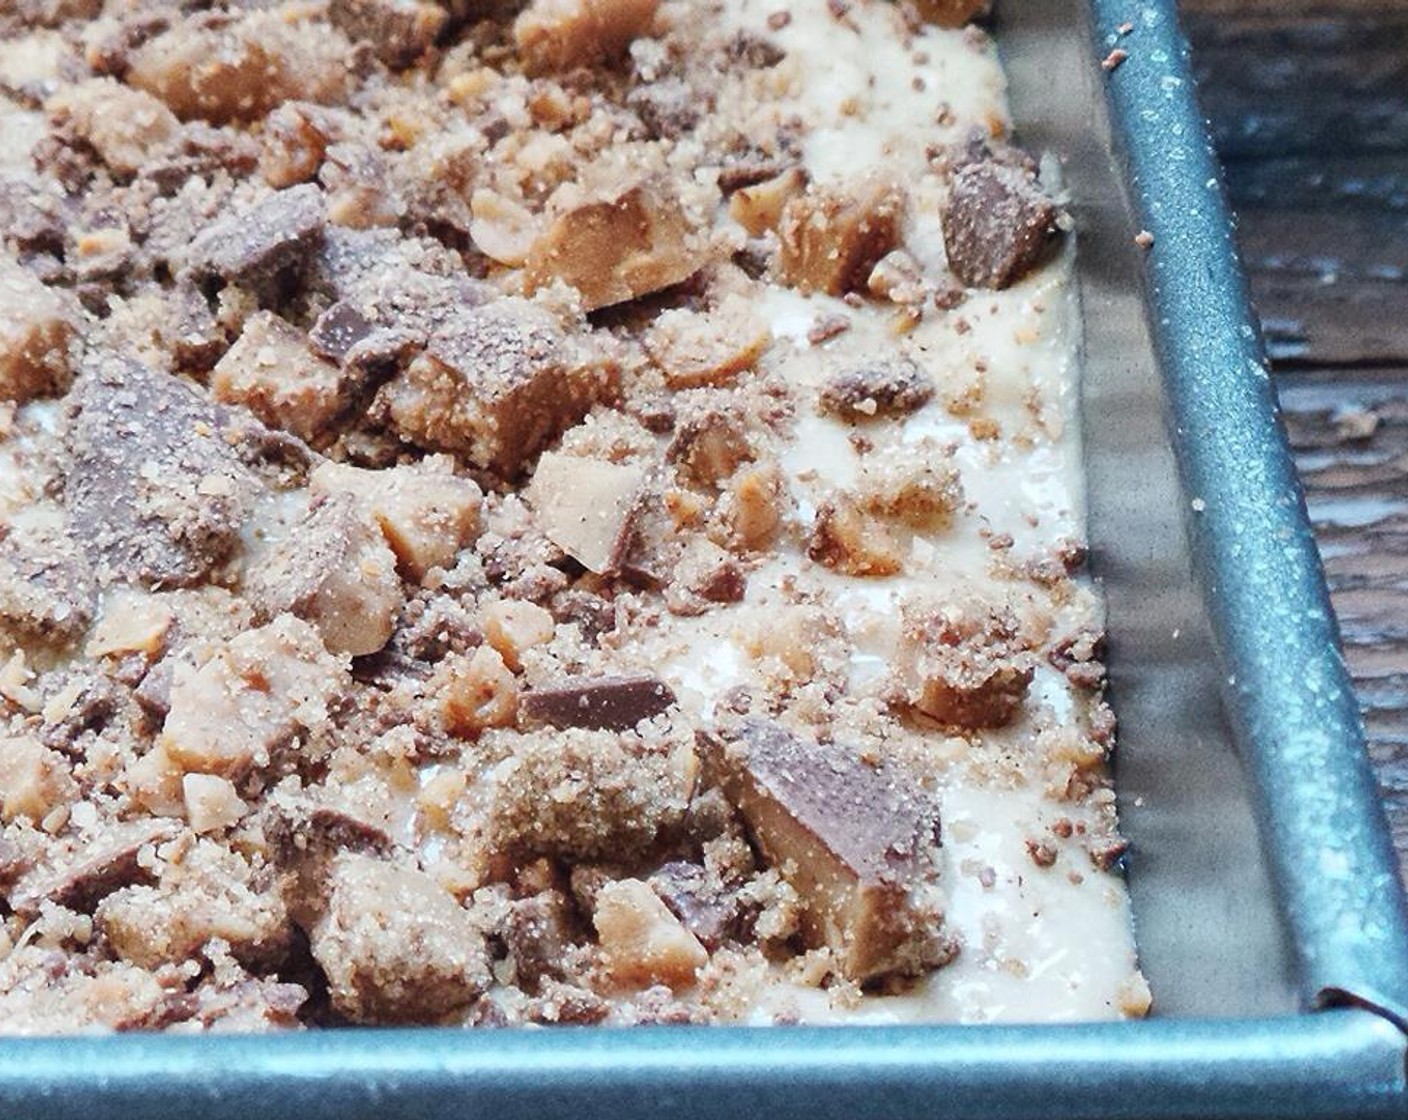 step 6 Prepare the crumble by mixing the crushed Heath Bars (1 1/2 cups), Brown Sugar (2 Tbsp) and Ground Cinnamon (1 Tbsp). Add half to the batter, mix, and pour into the prepared baking pan.